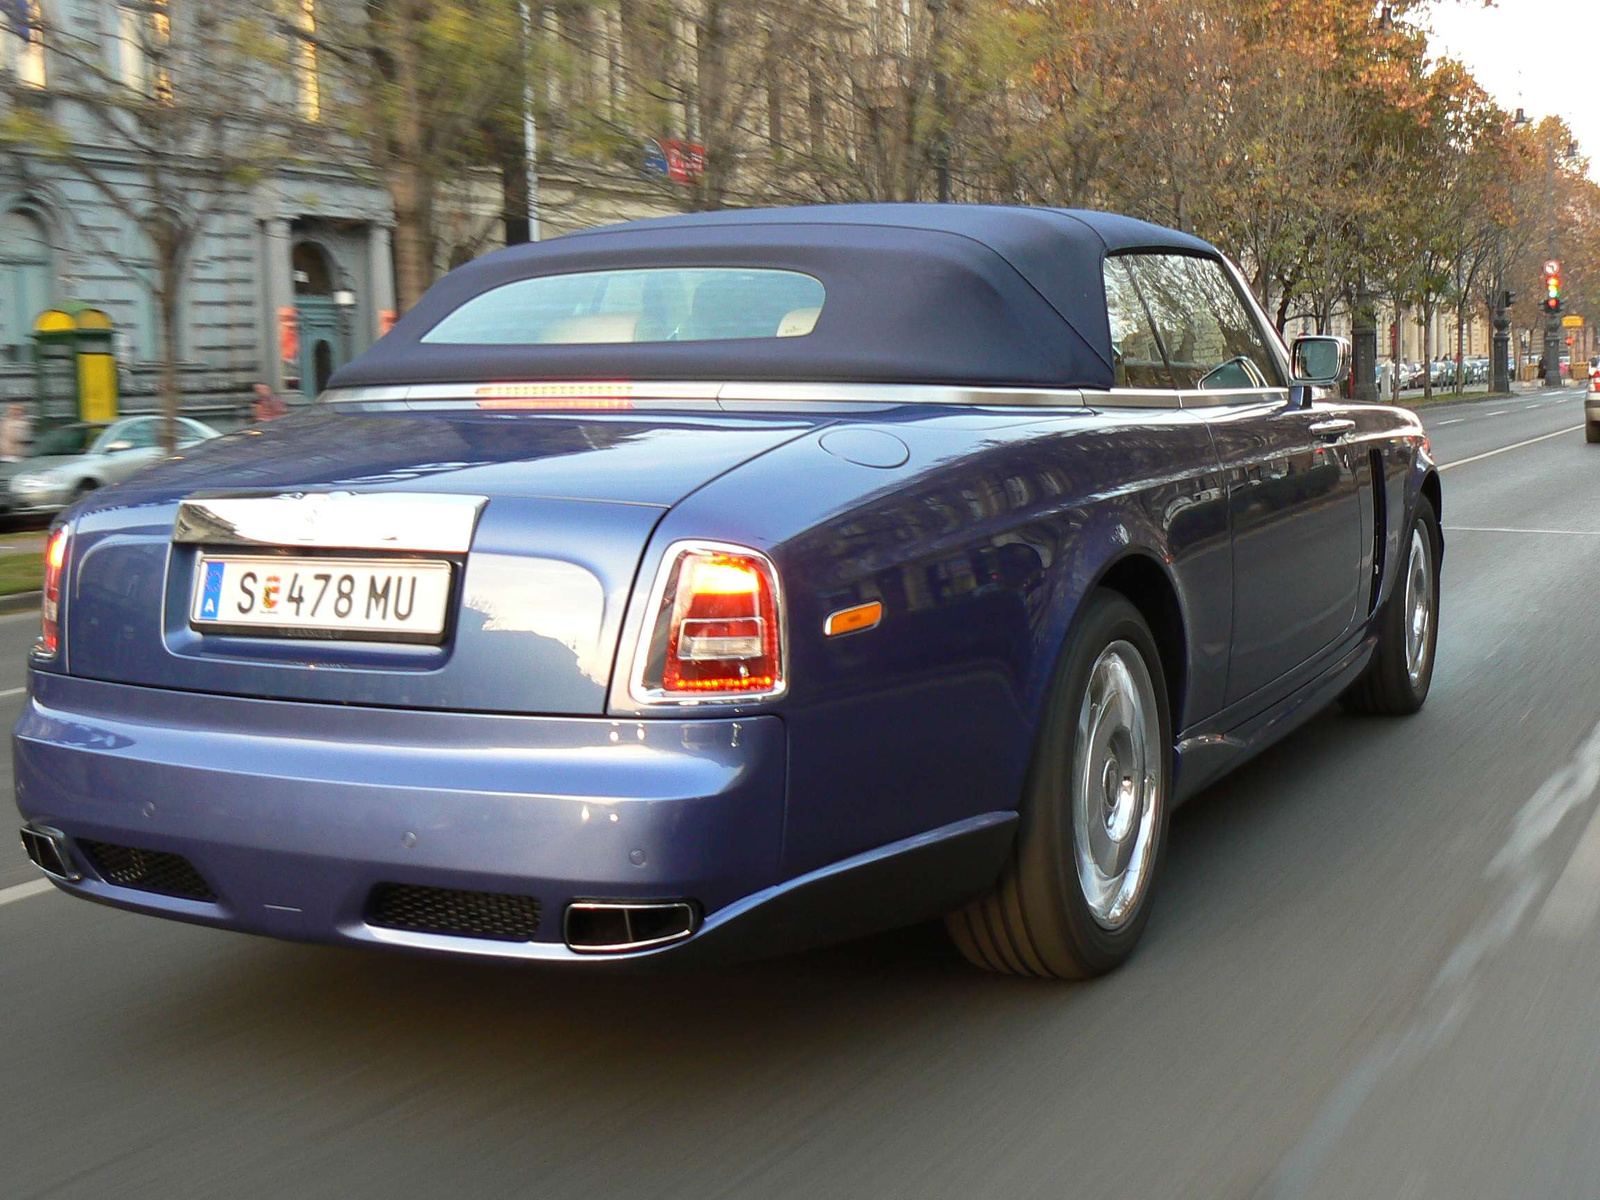 Rolls-Royce Drophead Coupe 004 (Mansory Bel Air)